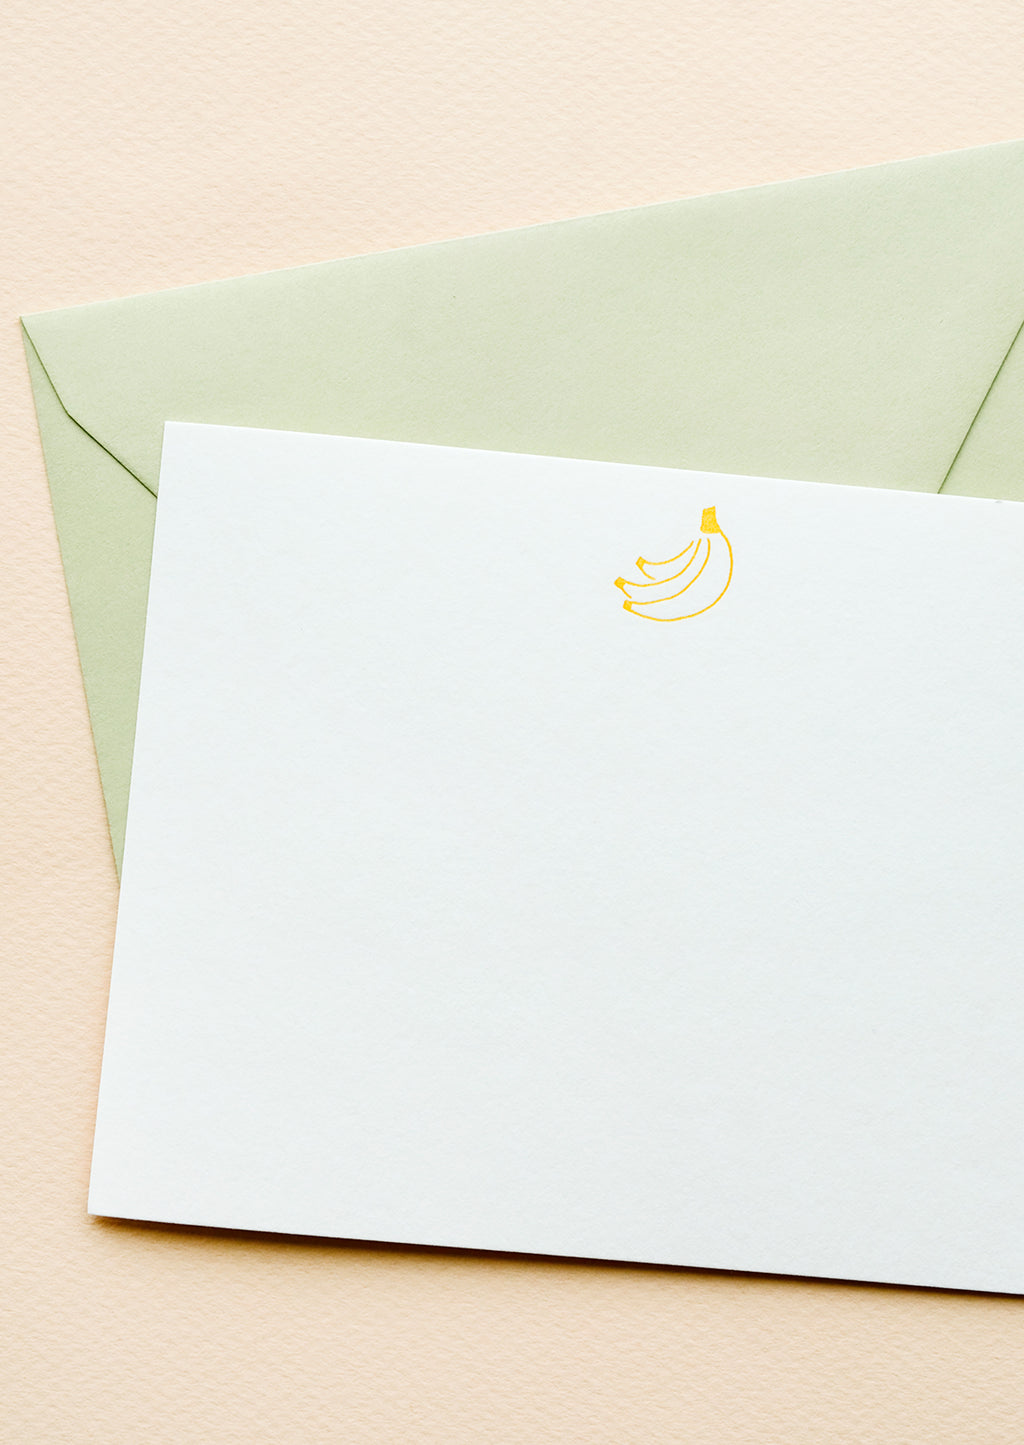 Banana Bunch: A mint colored envelope with white notecard and small icon of a bunch of bananas printed at top.